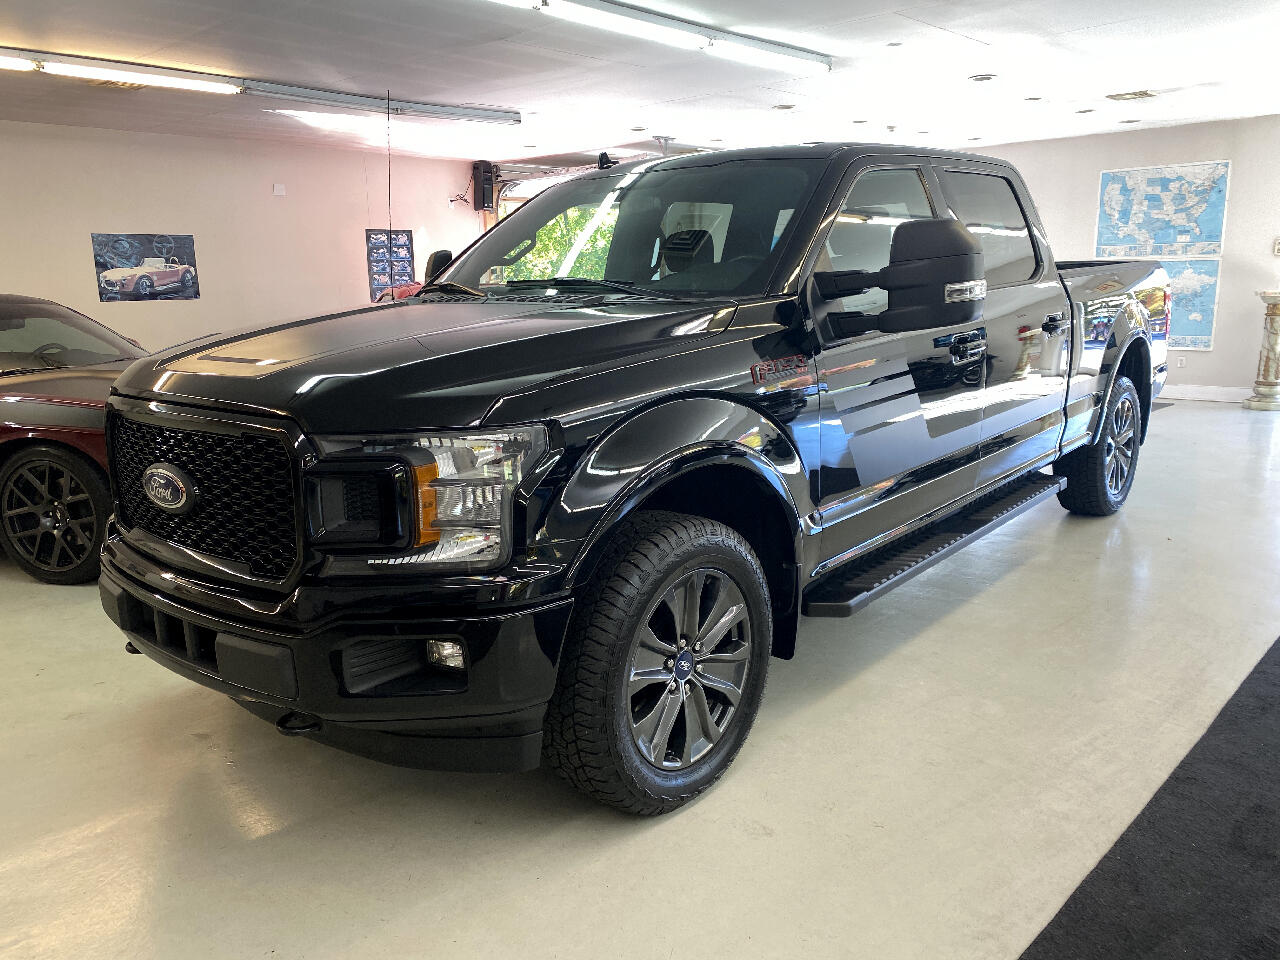 Used 2018 Ford F-150 XLT SuperCrew 6.5-ft. Bed 4WD for Sale in Highland 2018 Ford F 150 Xlt Supercrew 6.5 Ft Bed 4wd